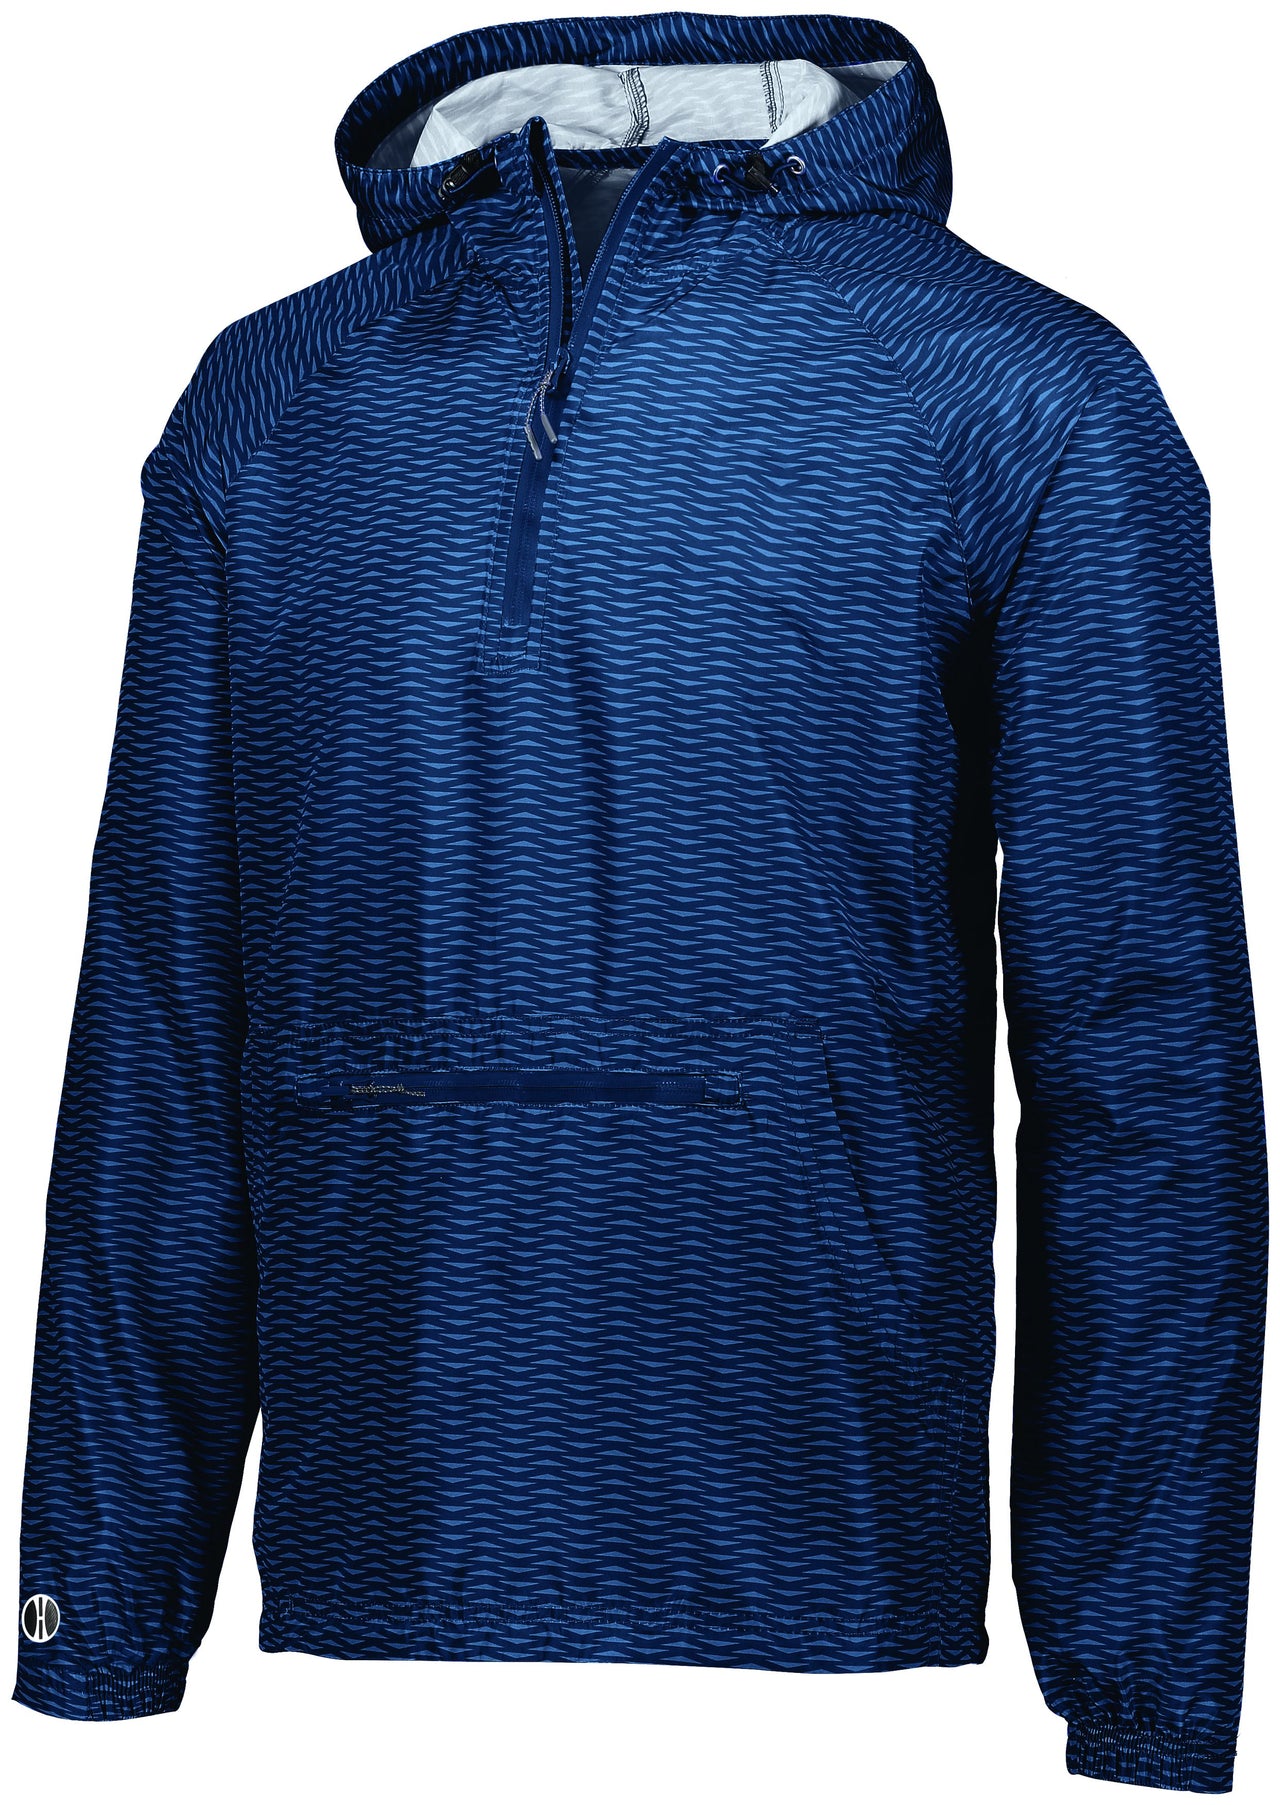 Youth Range Packable Pullover - 229654